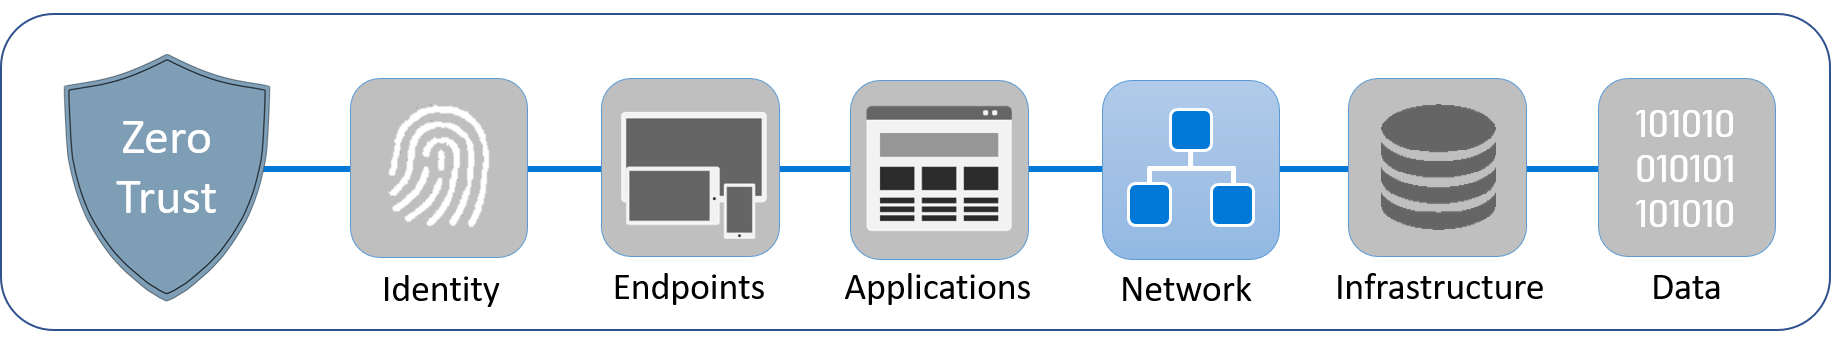 Diagram showing the six pillars that comprise Zero Trust: identity, endpoints, applications, network, infrastructure, and data. Network is highlighted.